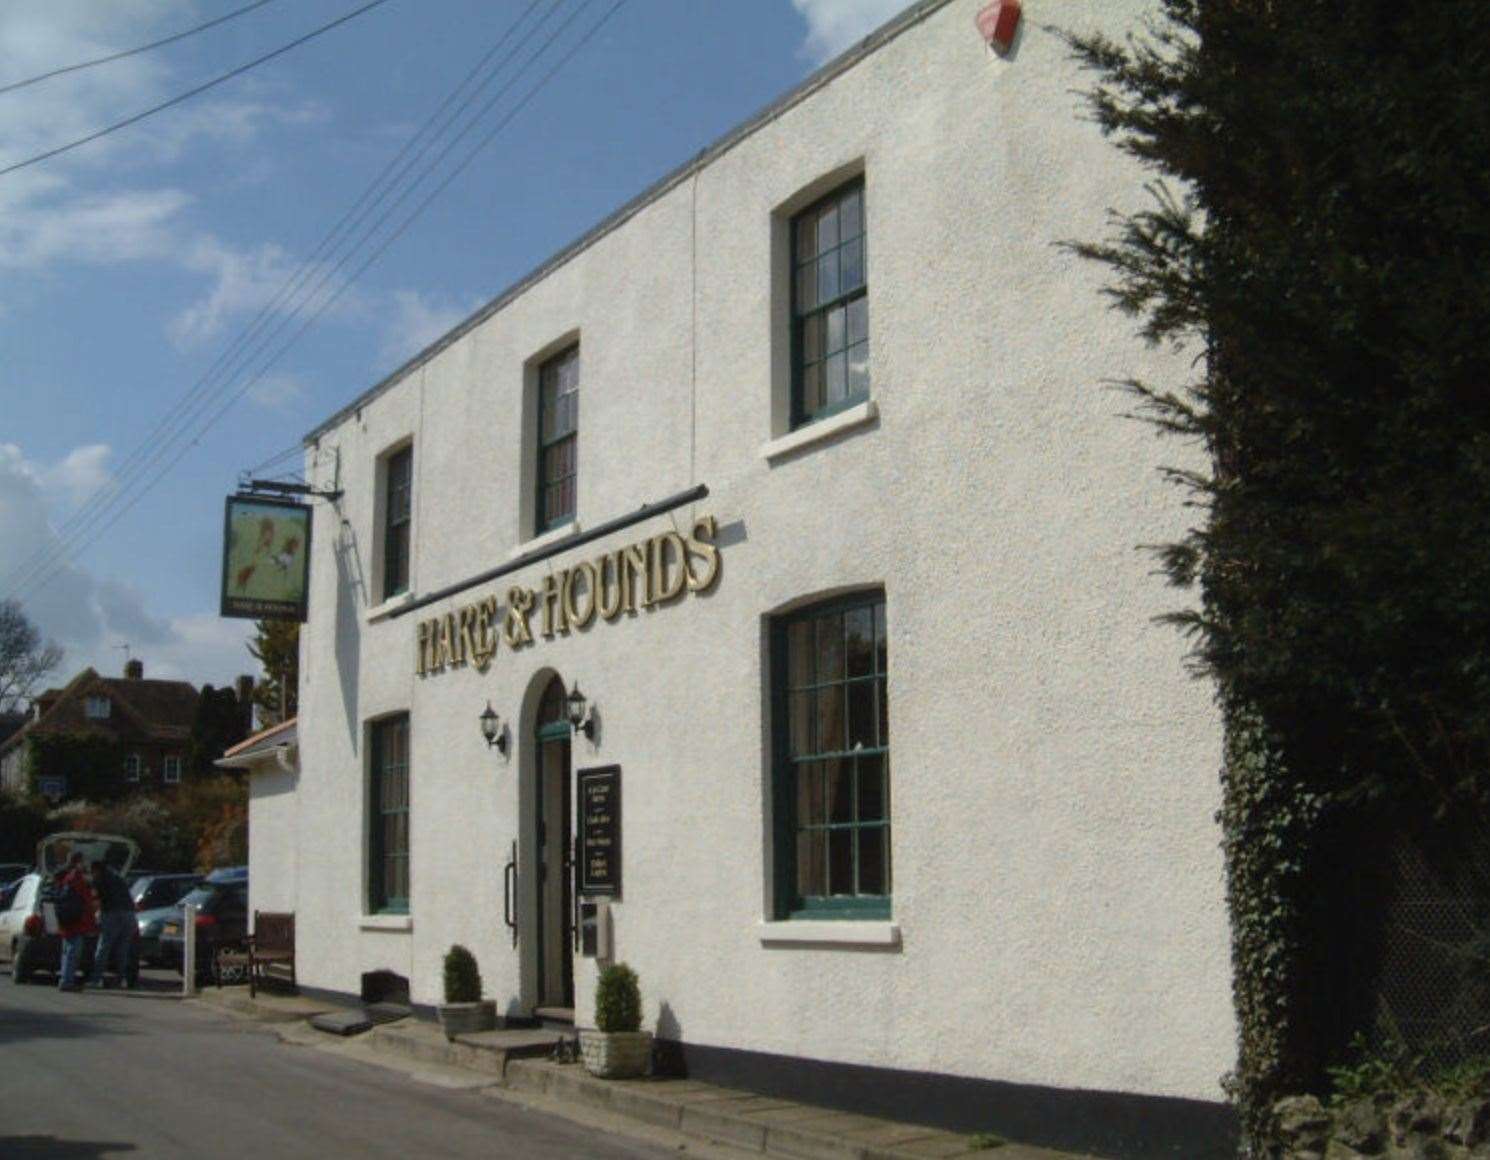 The Hare and Hounds in Deal pictured in 2008. Picture: Paul Skelton/dover-kent.com